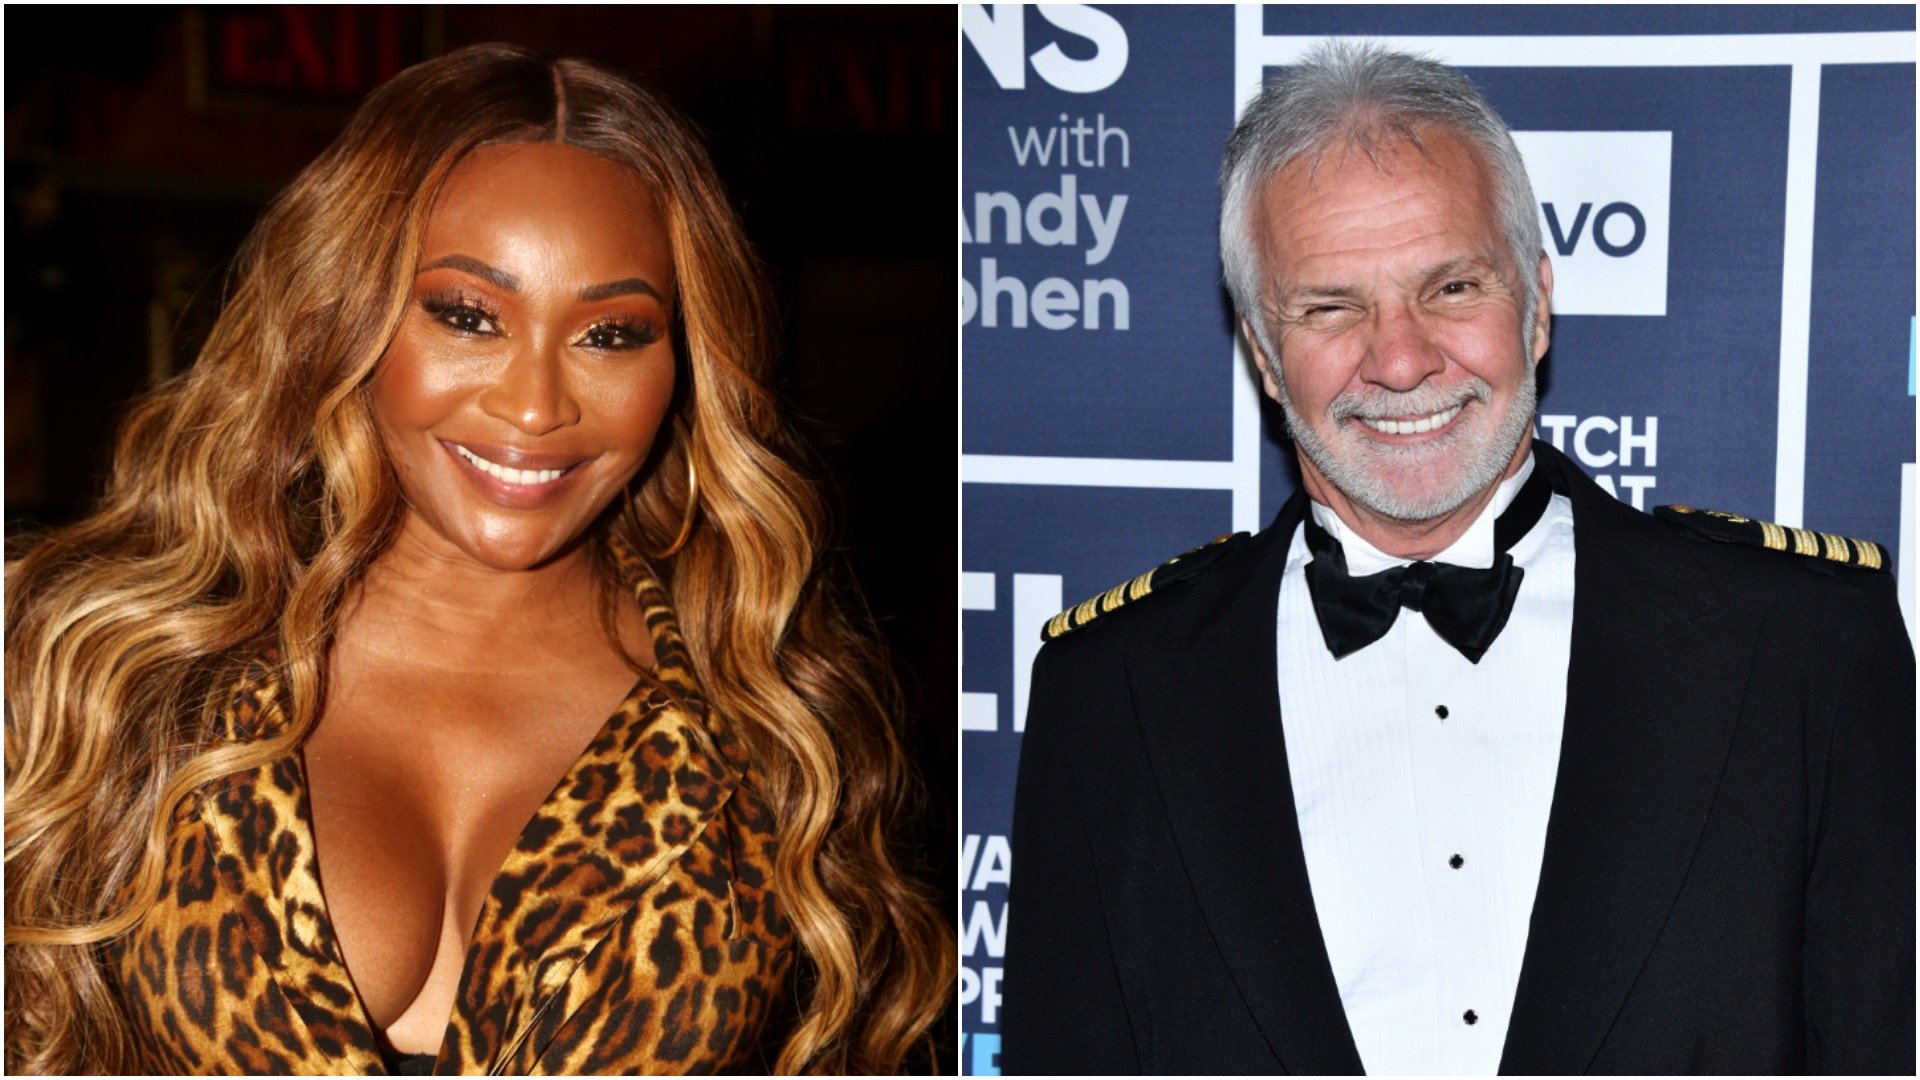 ‘Below Deck’: Captain Lee Recalls a ‘Great Time’ With Cynthia Bailey From ‘RHOA’ on the Show